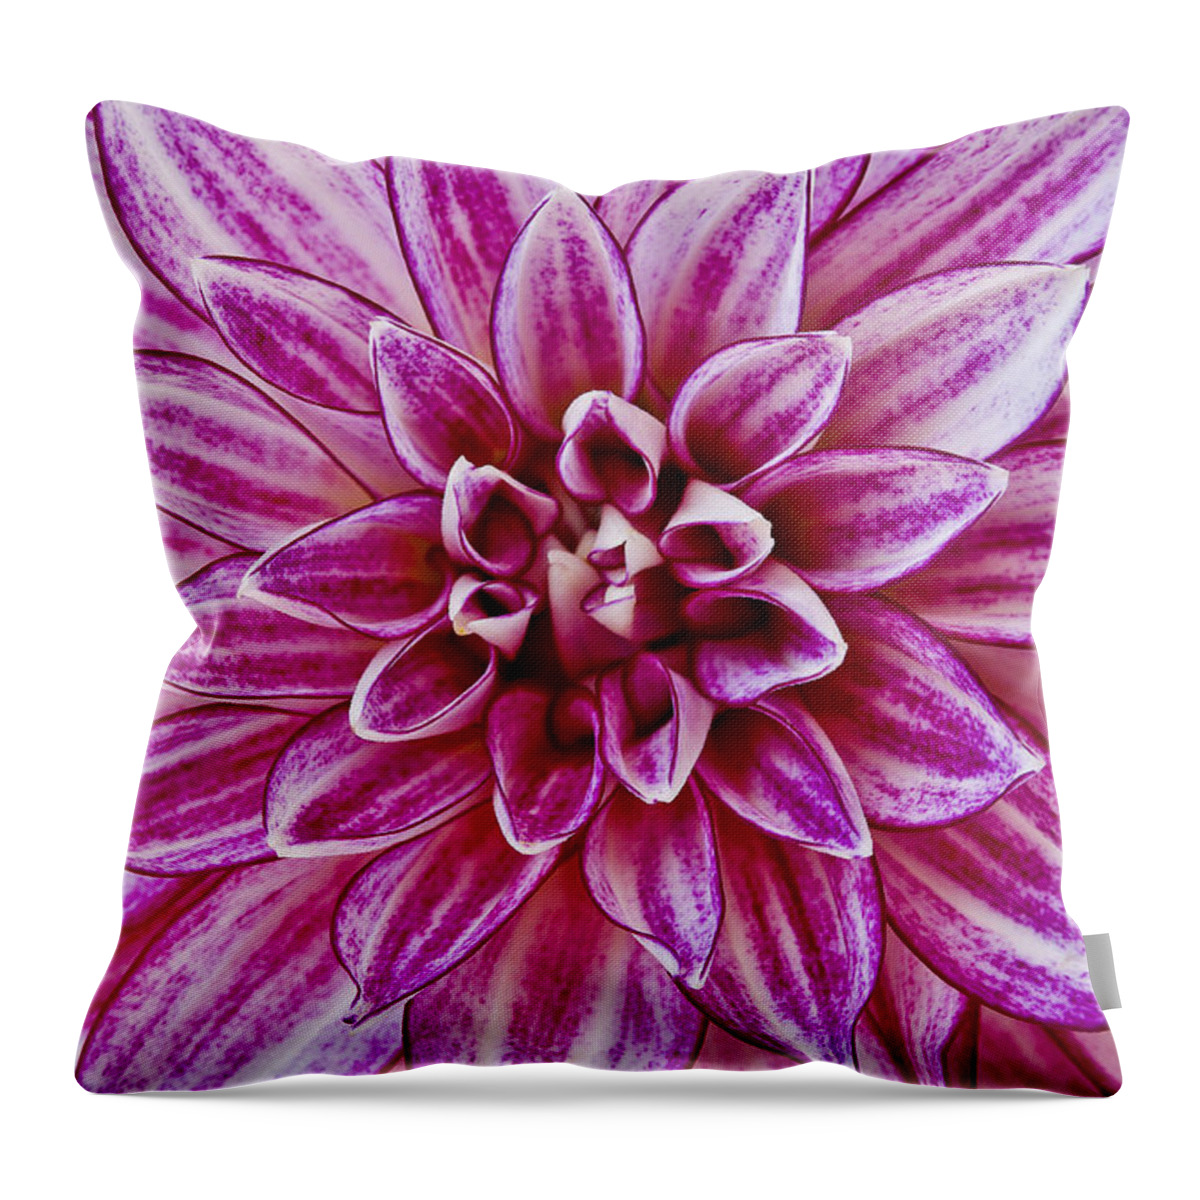 Flowers Throw Pillow featuring the photograph Purple Dahlia by Windy Osborn